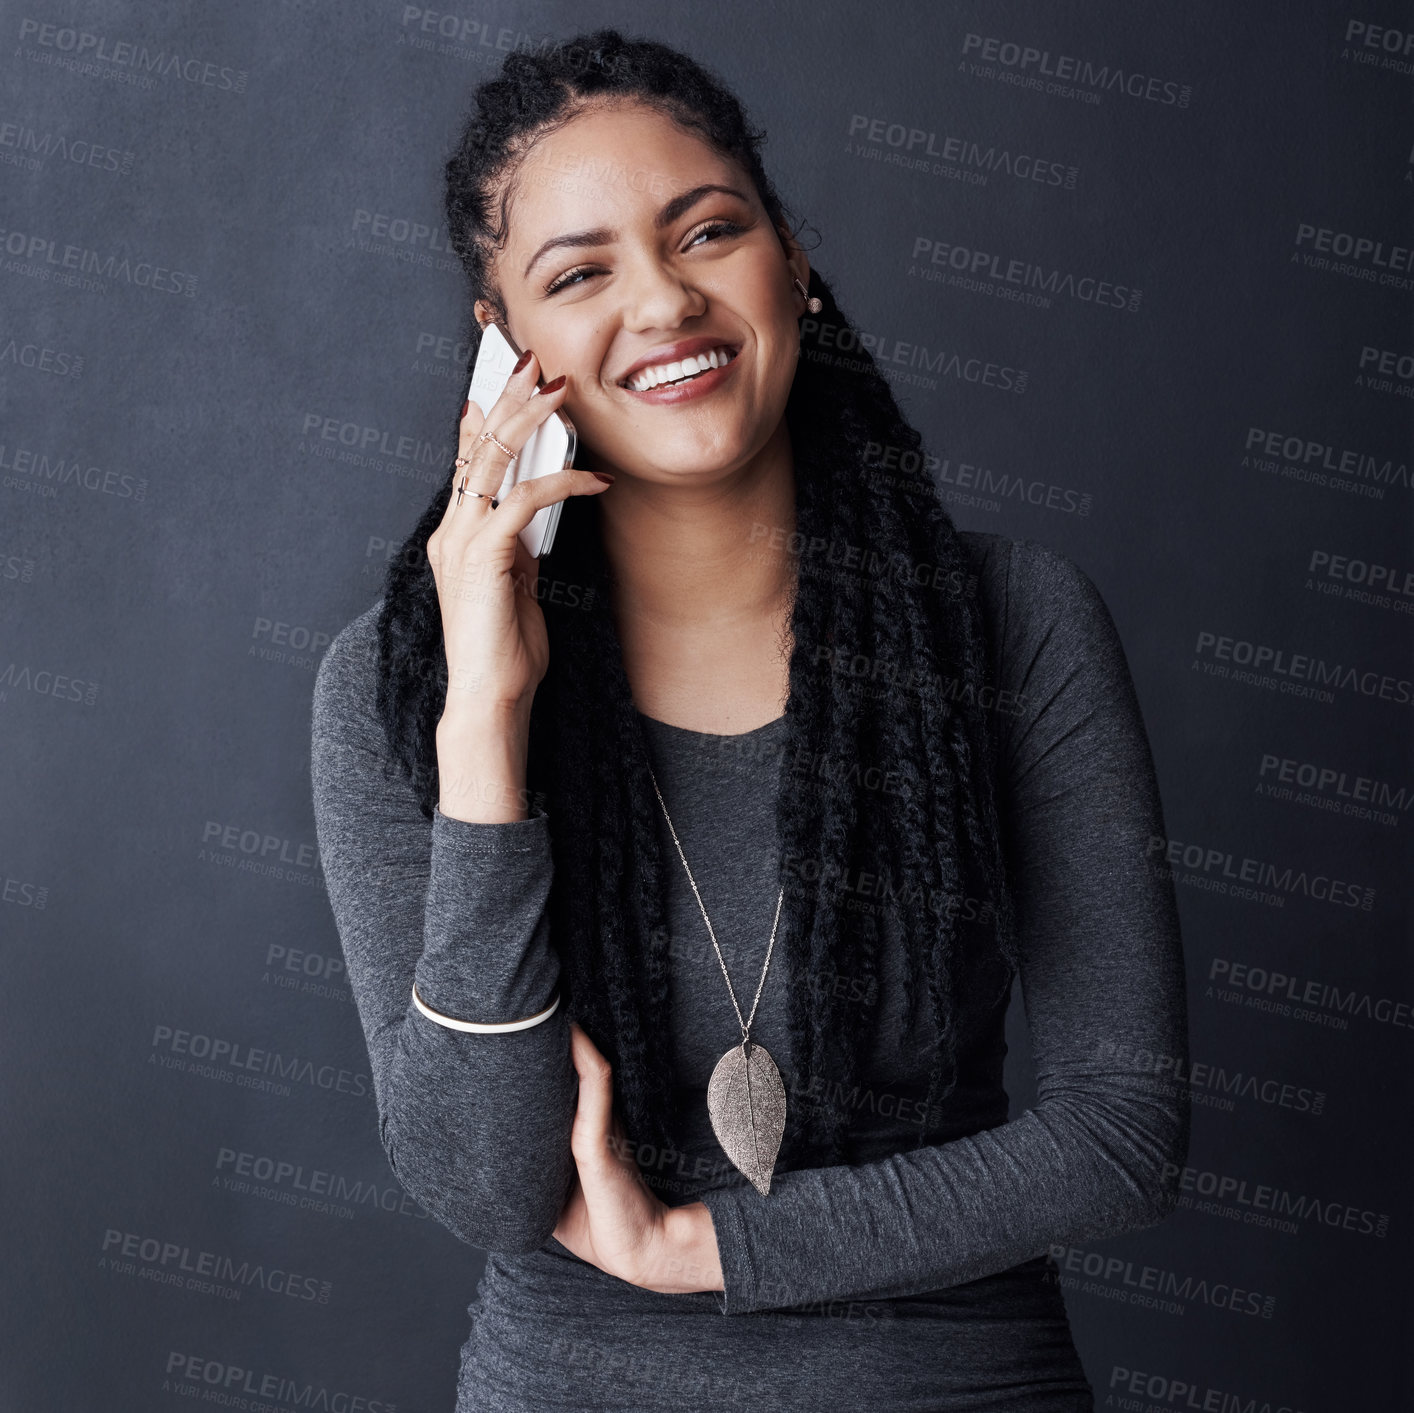 Buy stock photo Studio shot of a young woman talking on her cellphone against a grey background